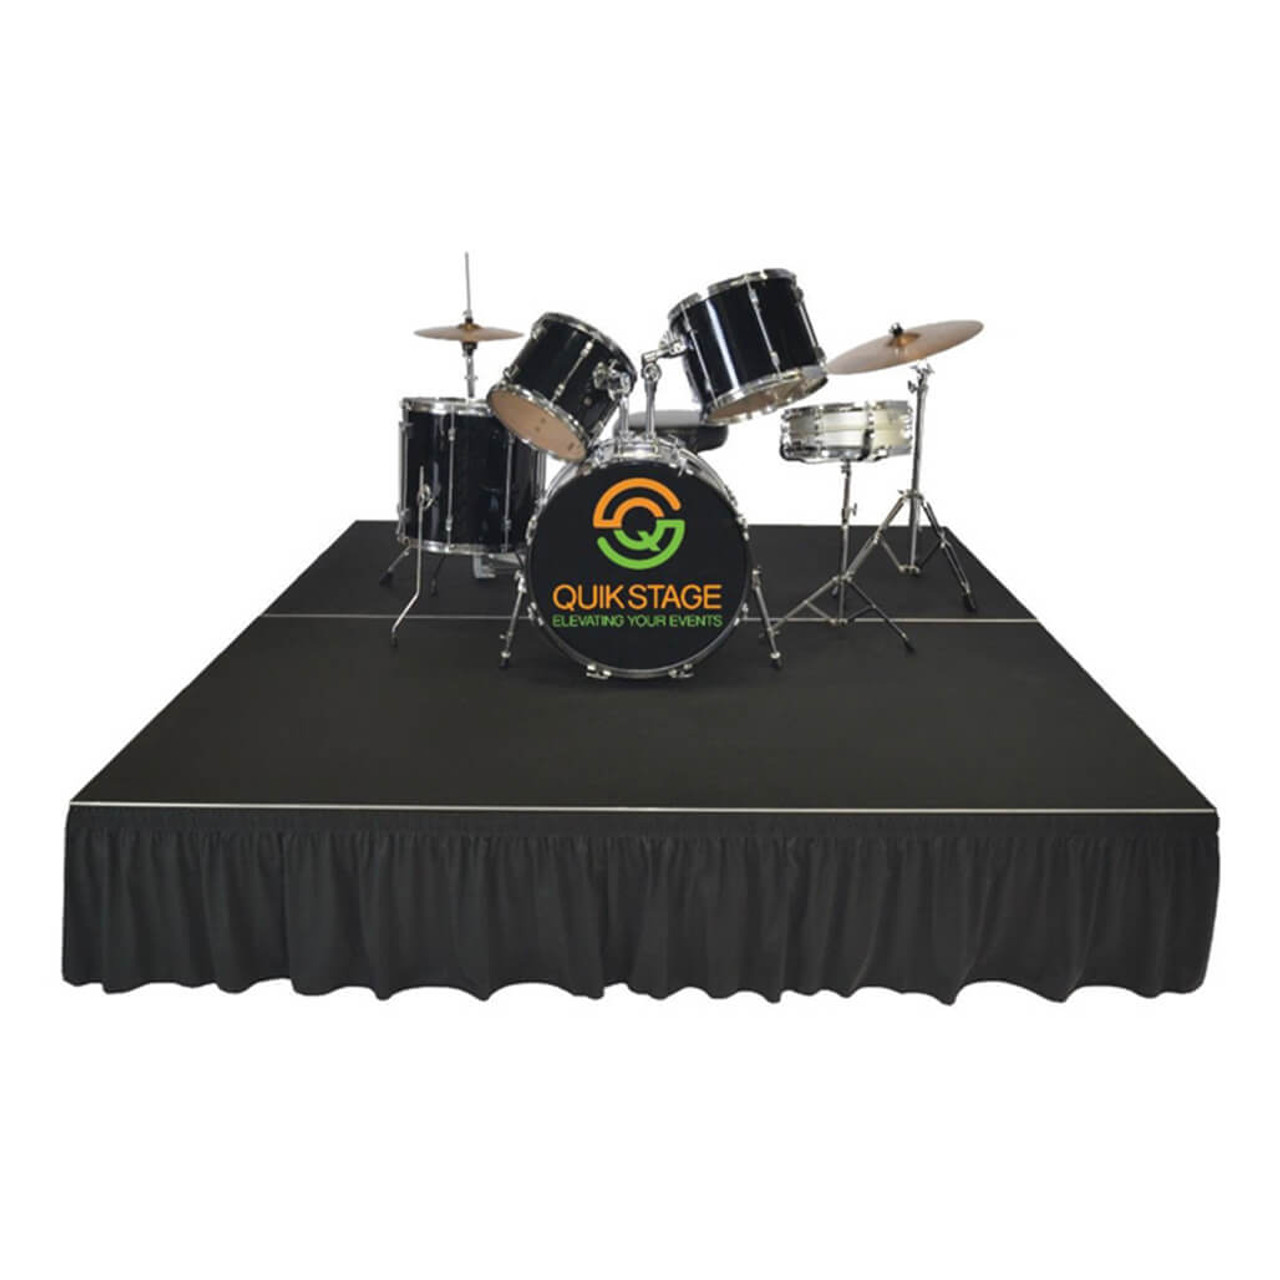 Top Rated Quik Stage 12' x 24' High Portable Stage Package with Black Polyvinyl Non-Skid Surface. Additional Heights and Surfaces Available - Drum Riser with skirting